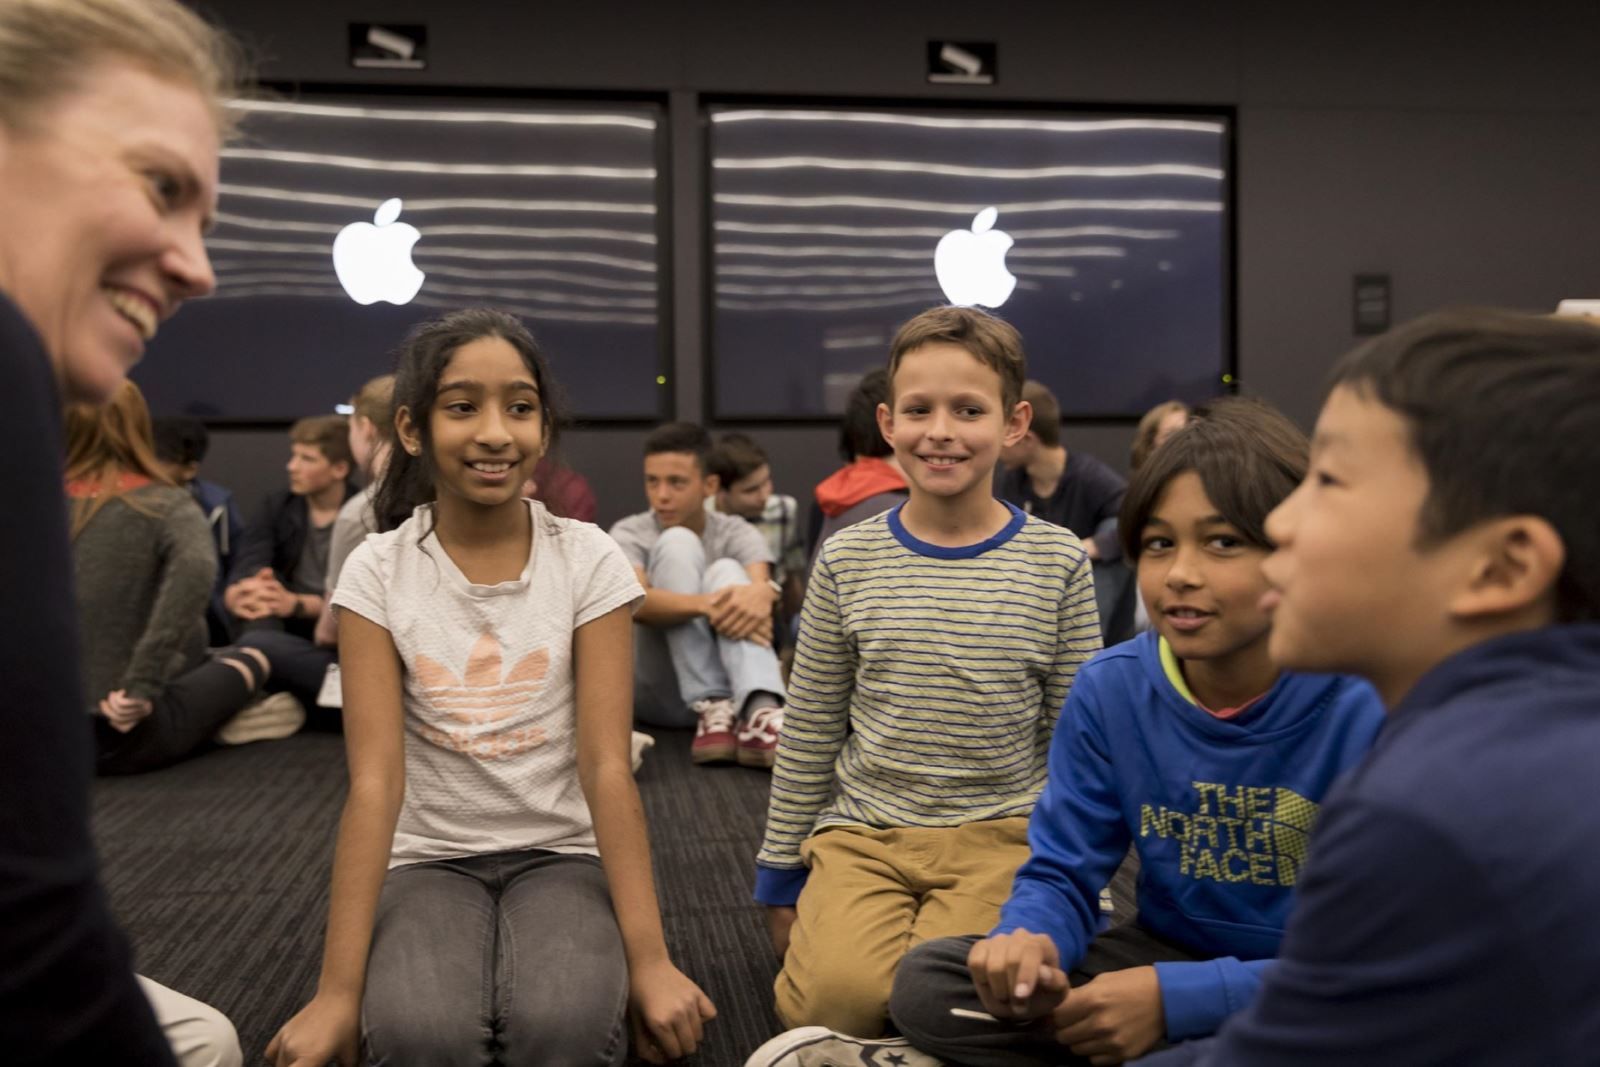 Apple has a UK chip design team - and has opened its doors to inspire kids image 1